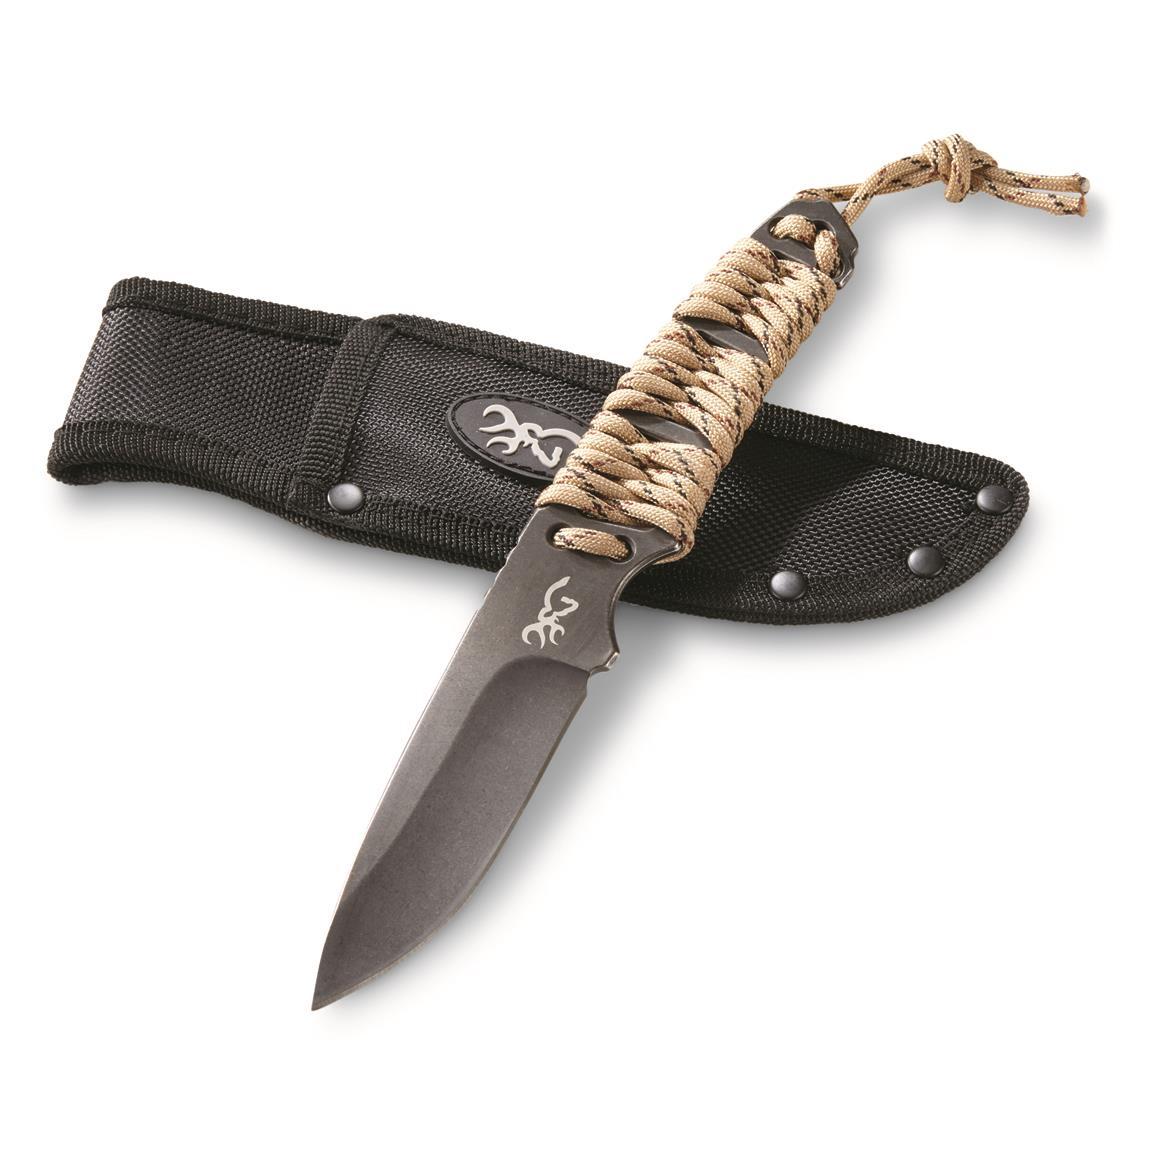 Browning Survivalists Paracord Knife, Flat Dark Earth